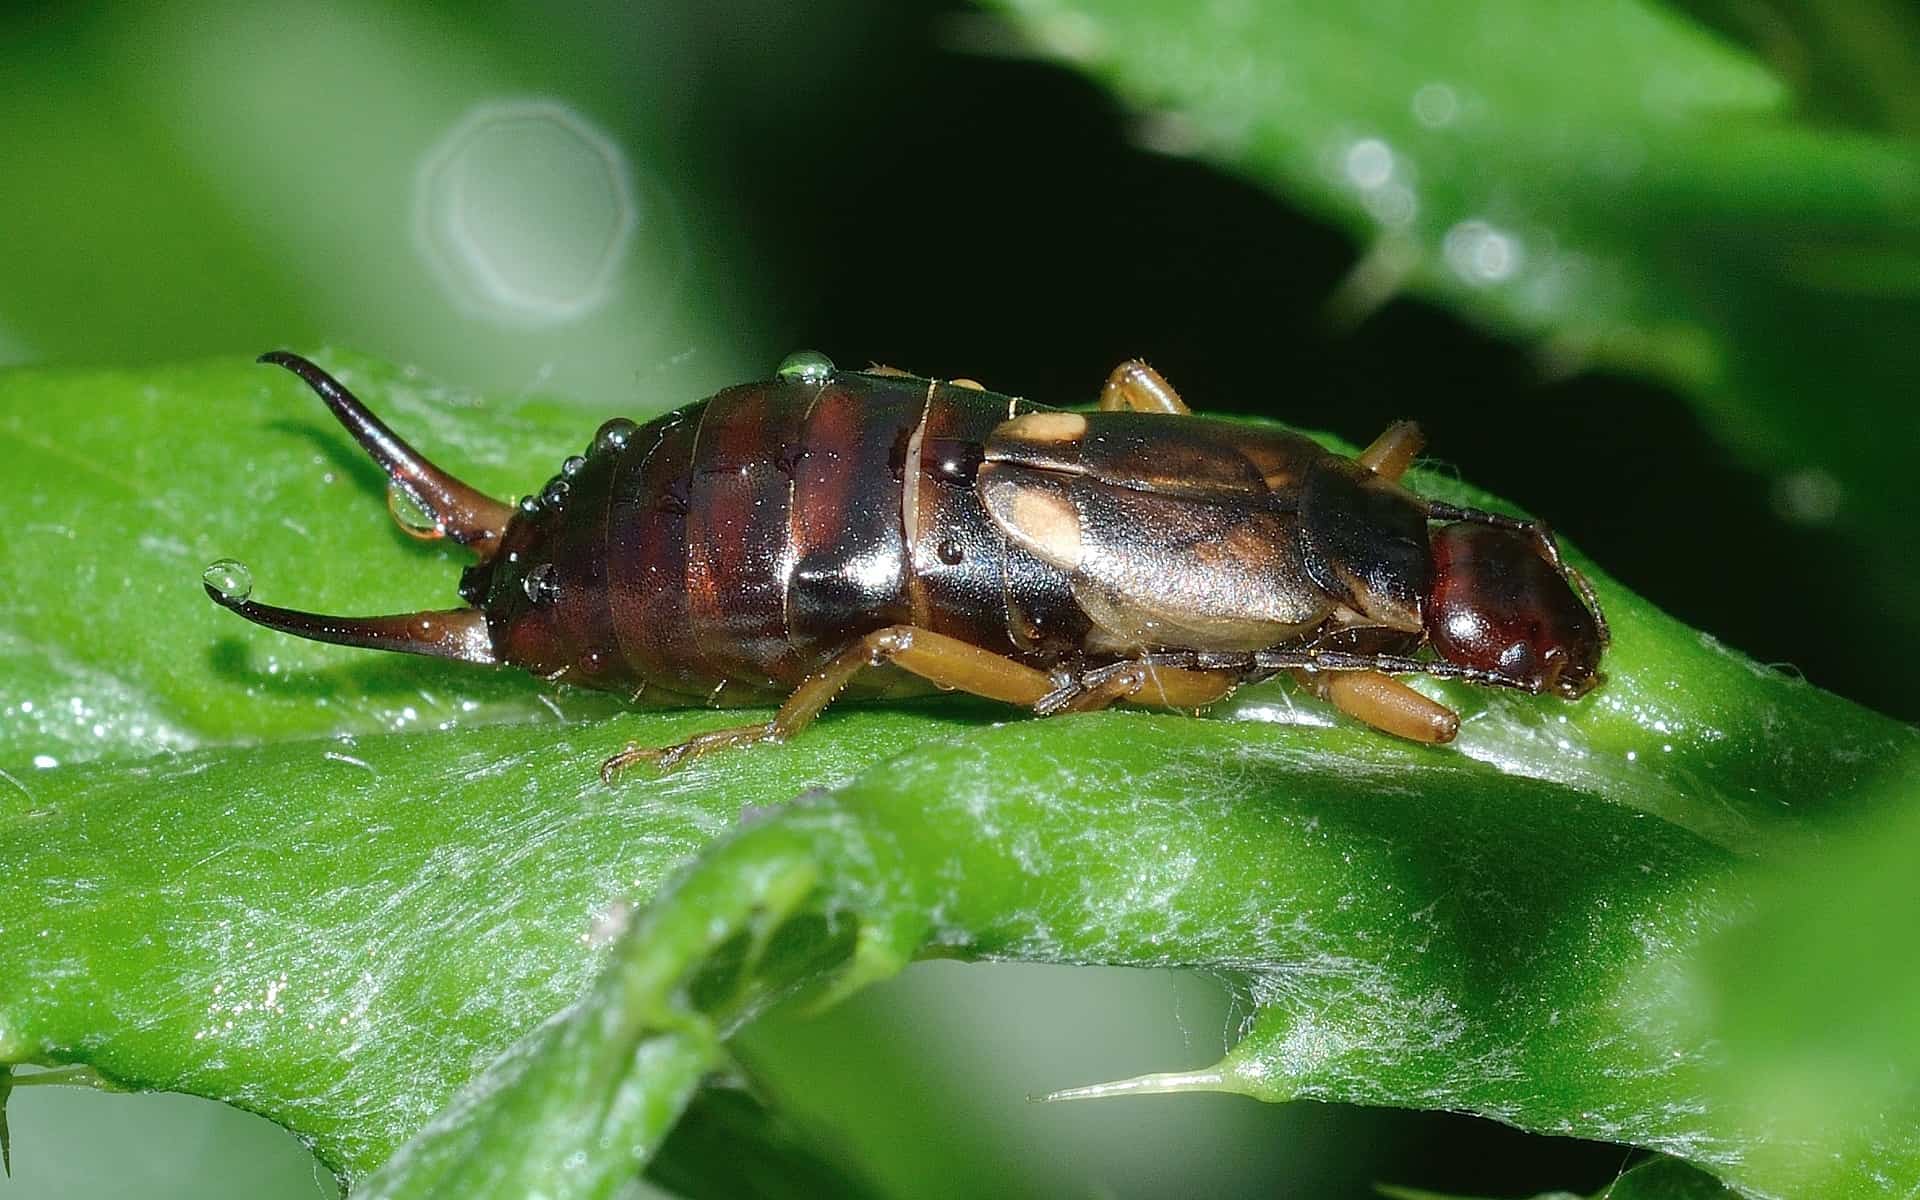 Top 10 Facts about Earwig - Diet, Lifespan, Habitat & More